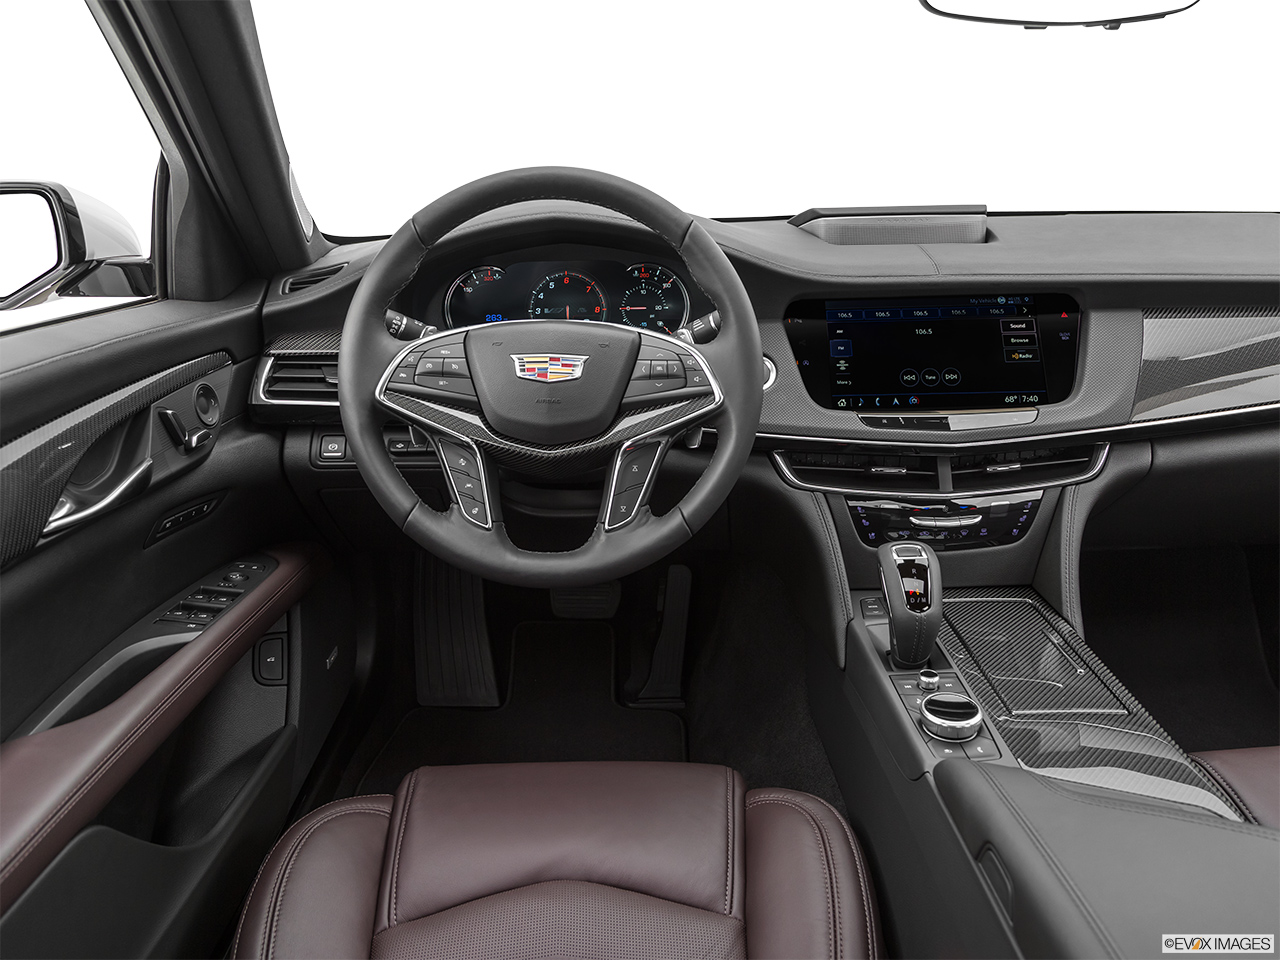 2019 Cadillac CT6-V Base Steering wheel/Center Console. 